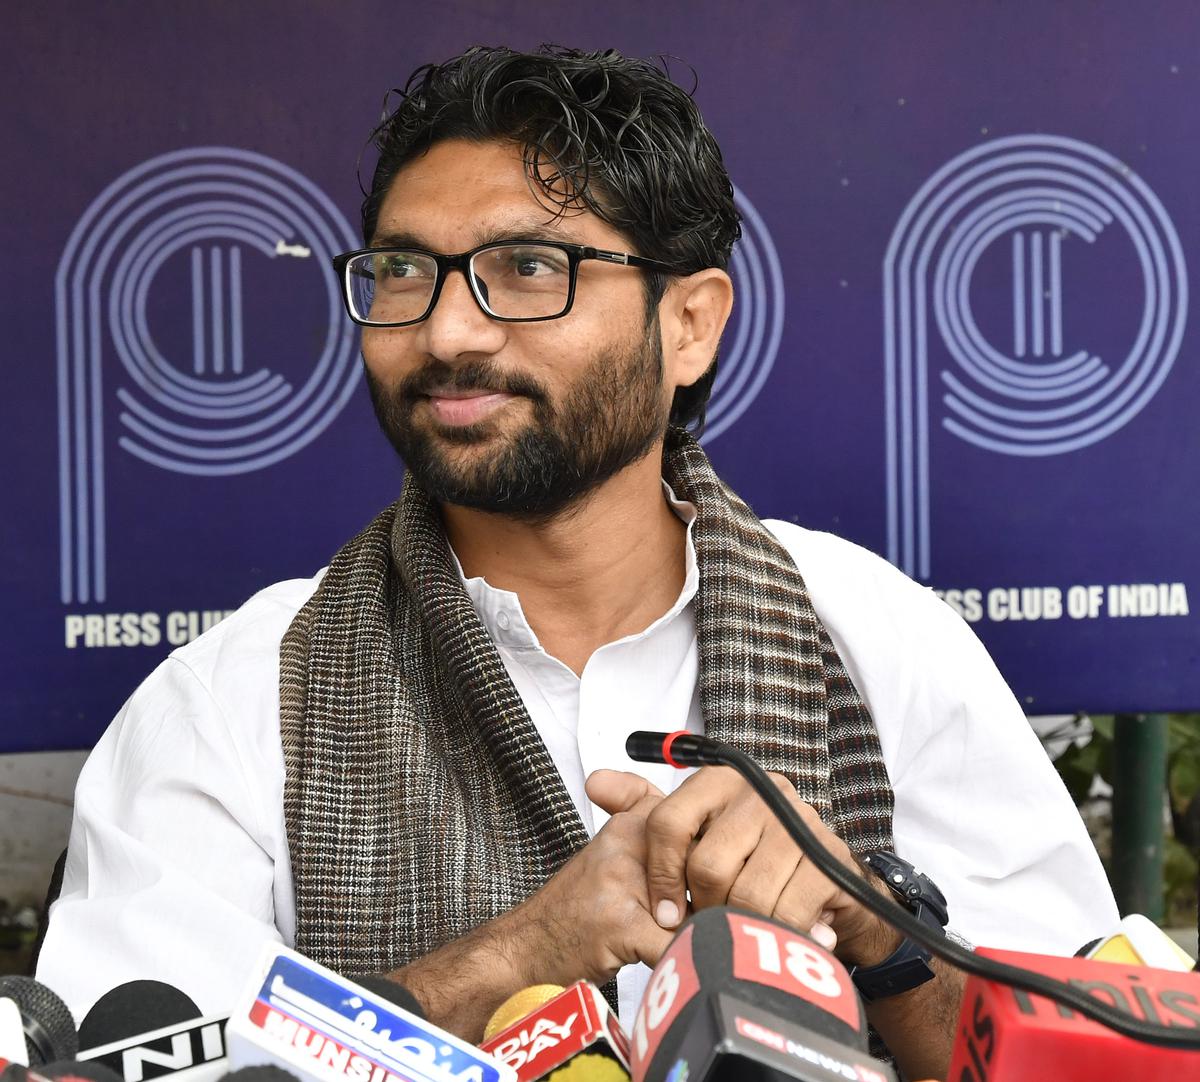 'Silent wave' in Gujarat, upcoming State polls to give new direction to country: Jignesh Mevani